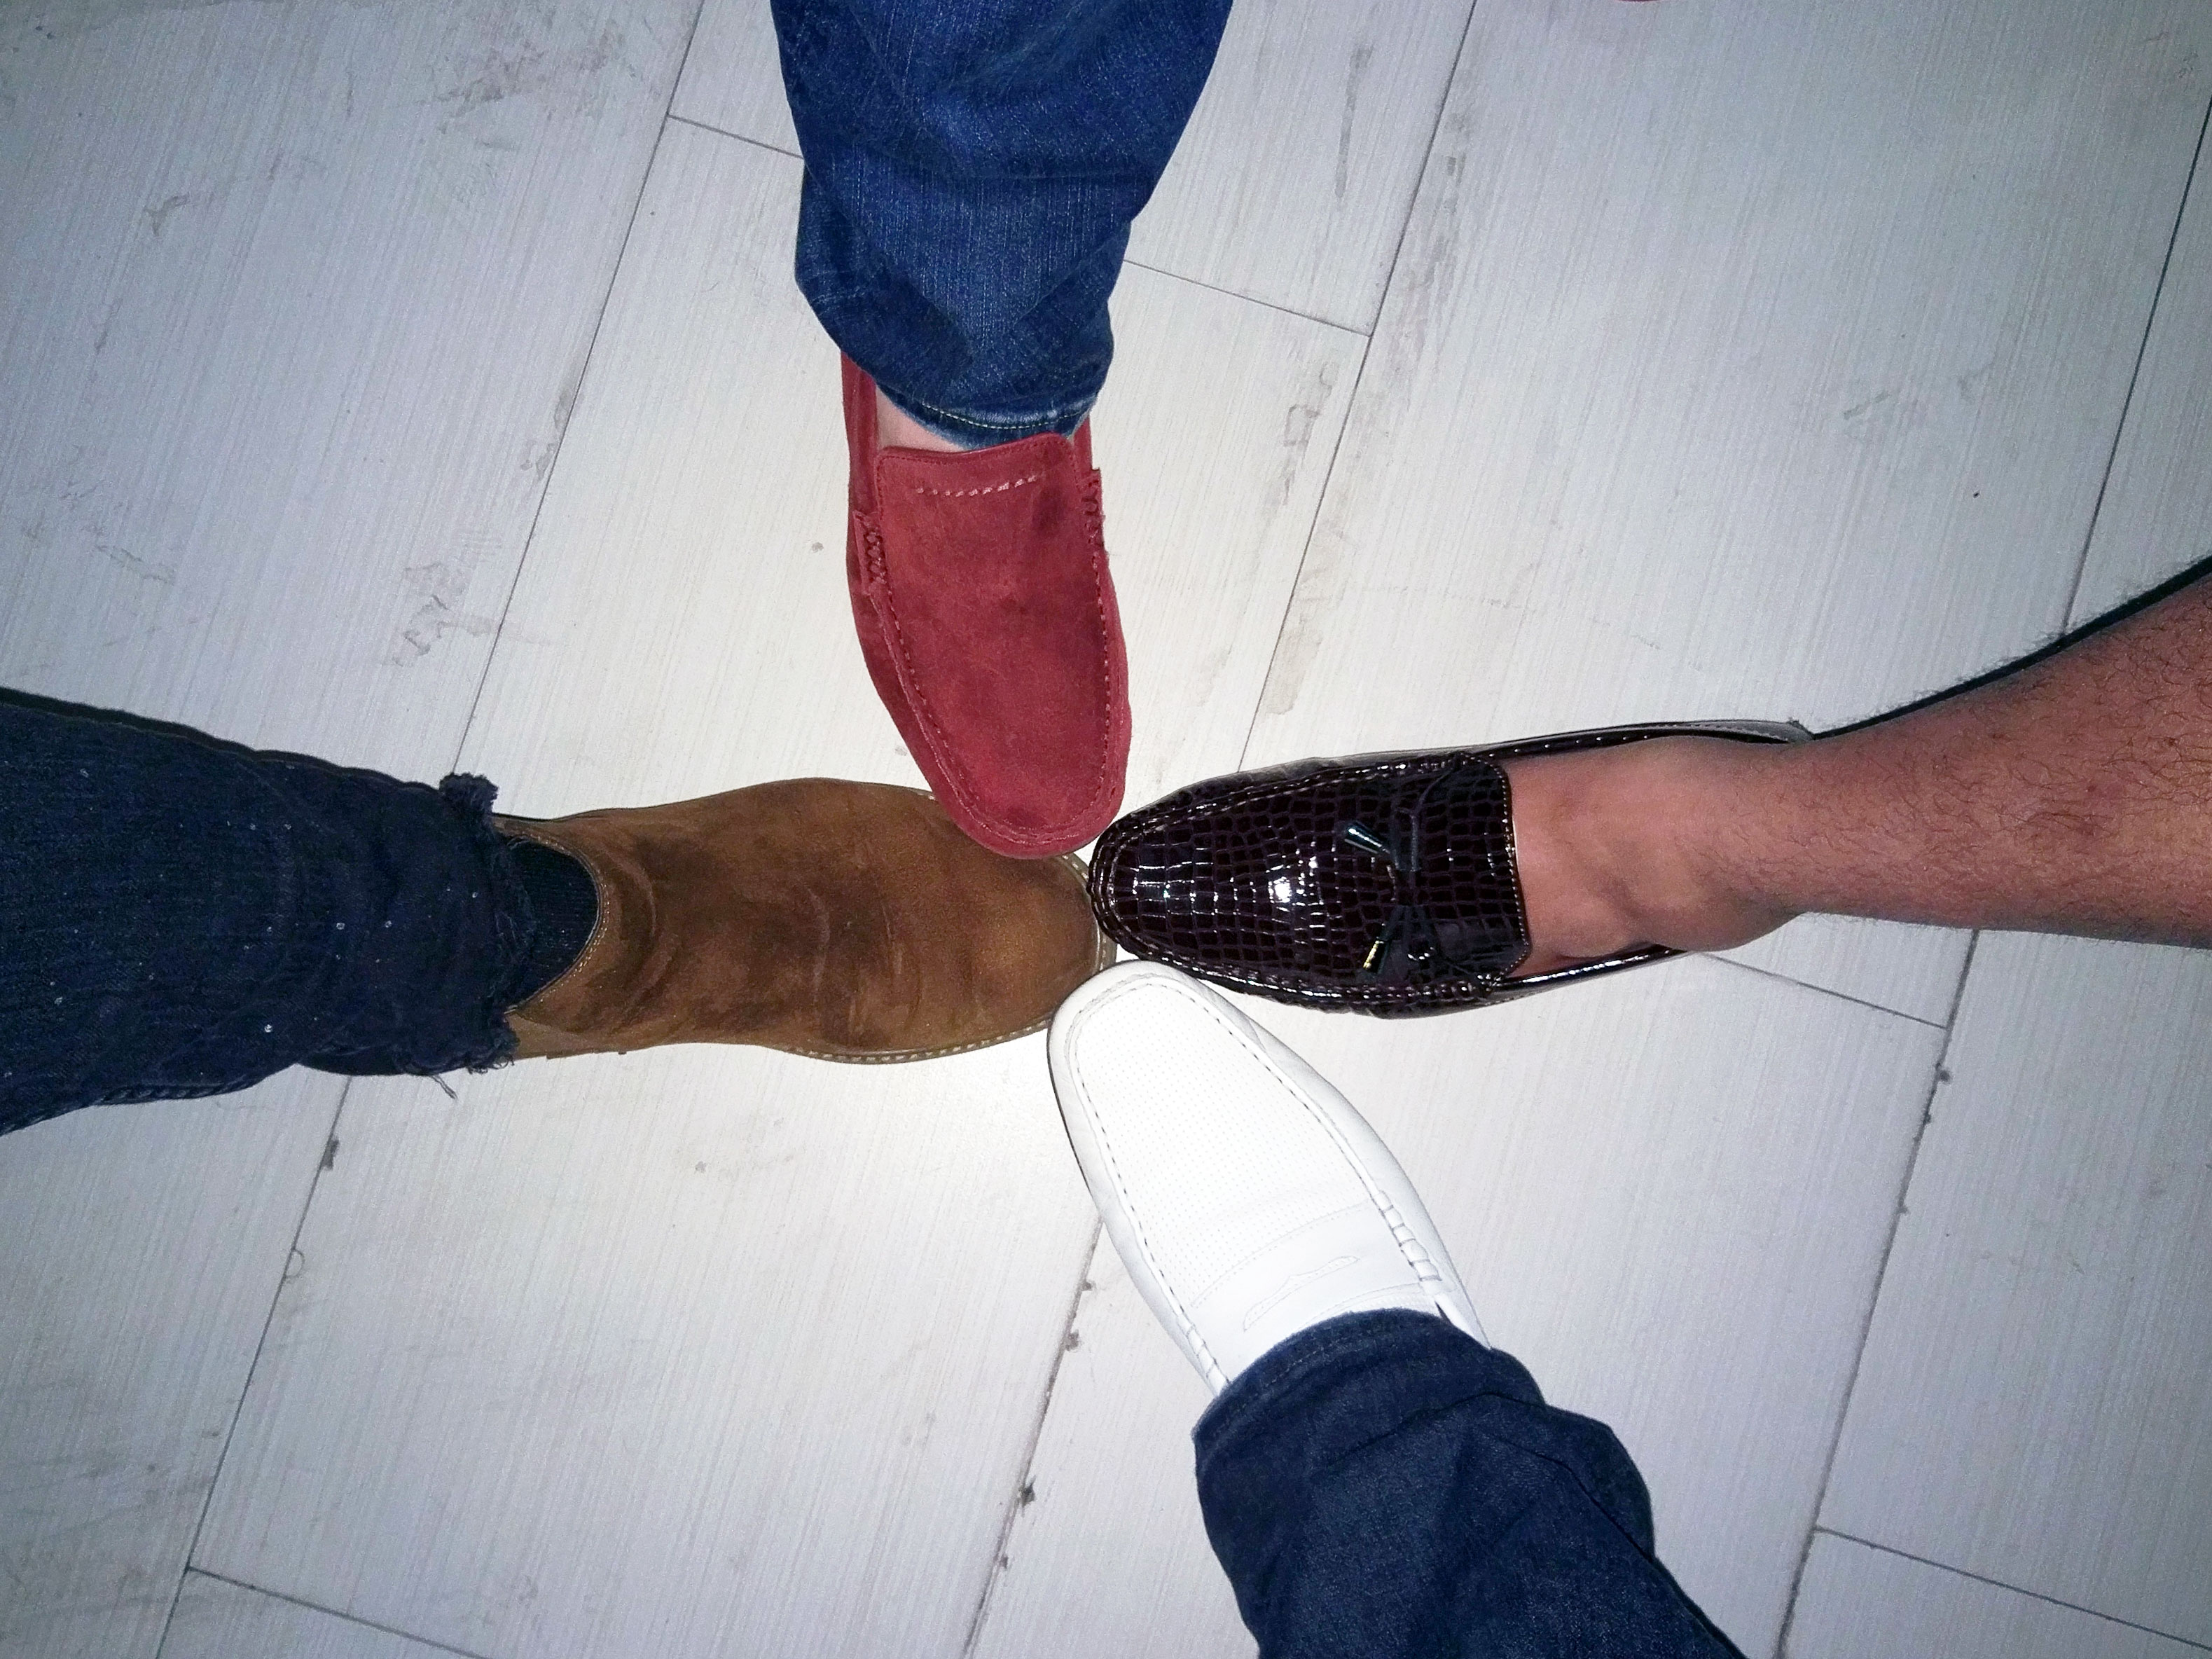 Comparing our shoes at an Oak Lawn happy hour.